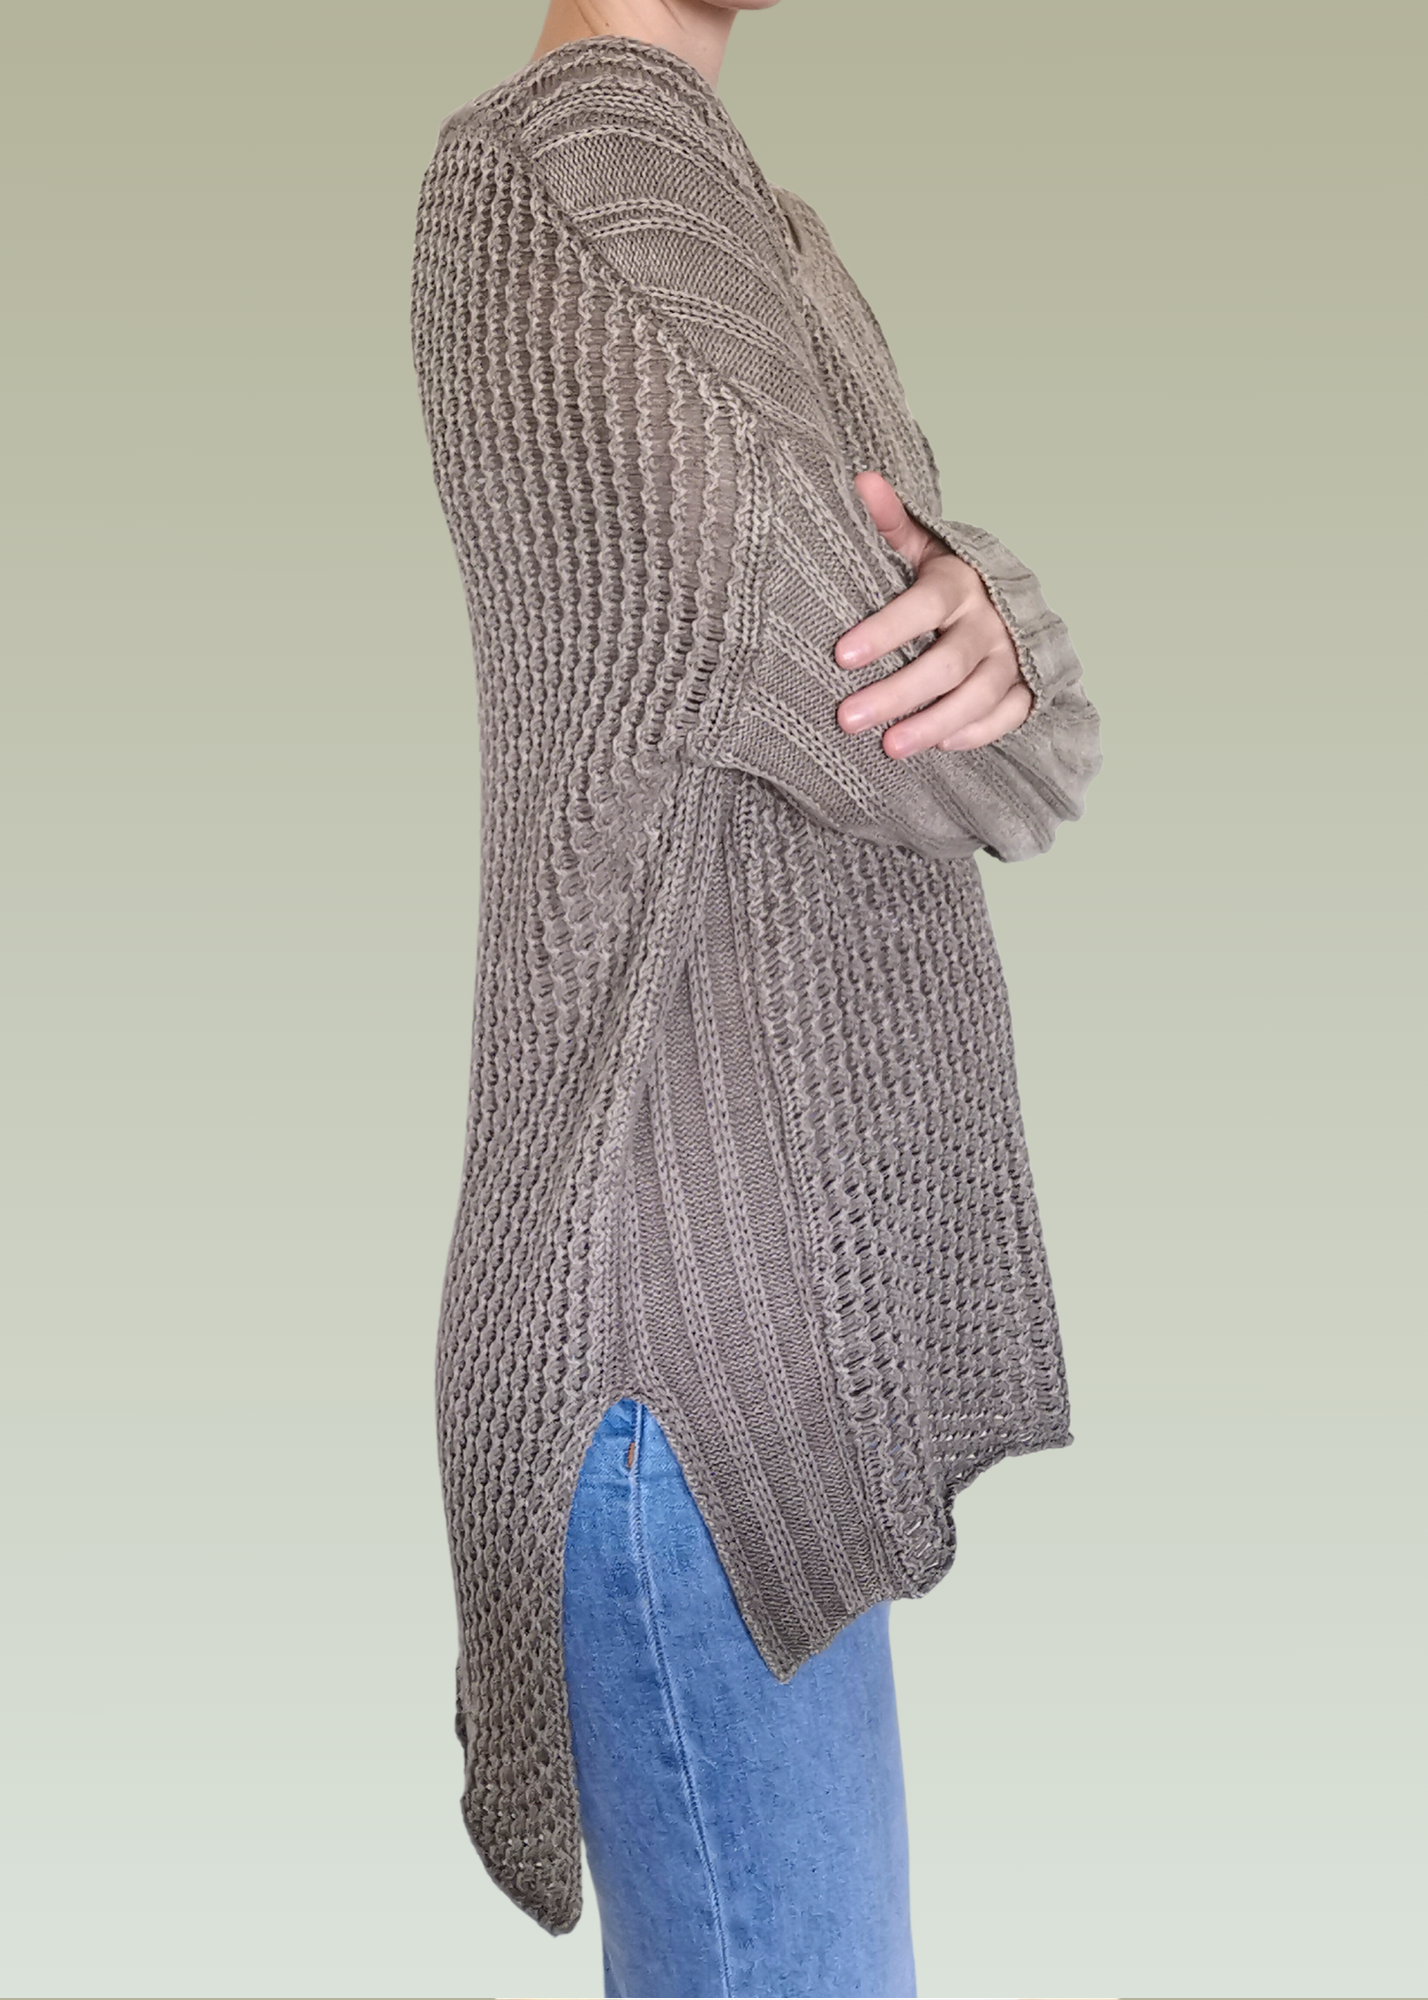 Simply Noelle Cotton Sweater (S/M)